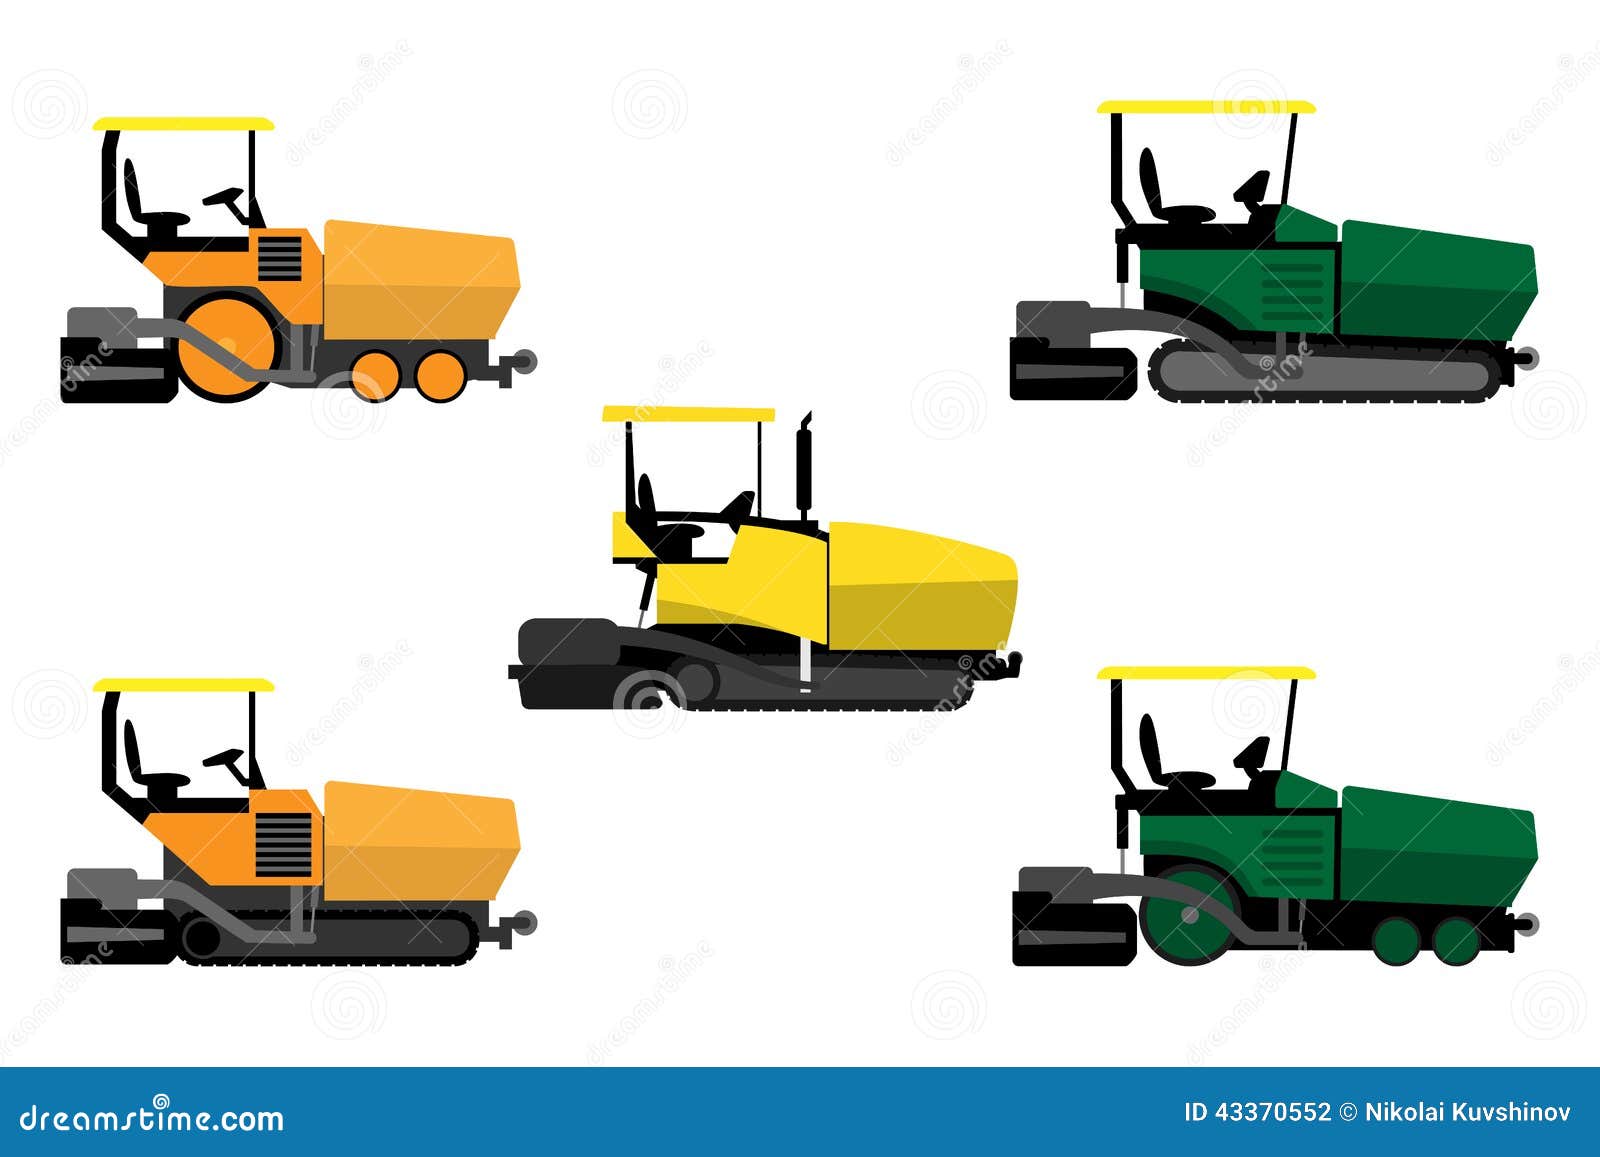 clipart of paving and asphalt work